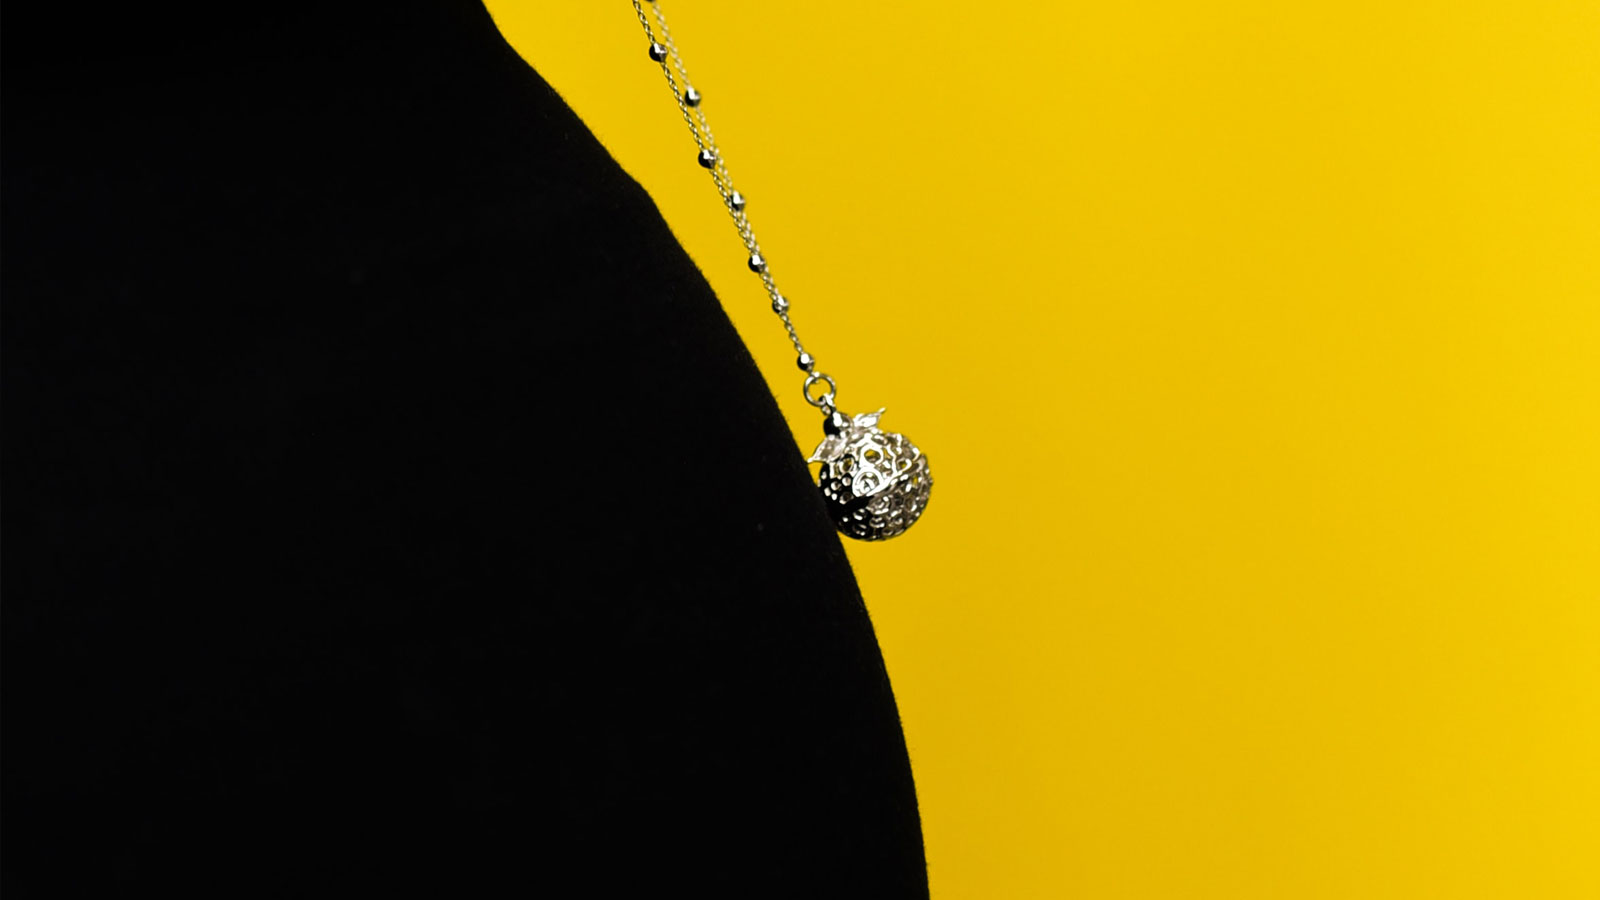 Pregnant women Thought Piece. A close up silhouette image of a pregnant belly with a necklace highlighted on a bright yellow background